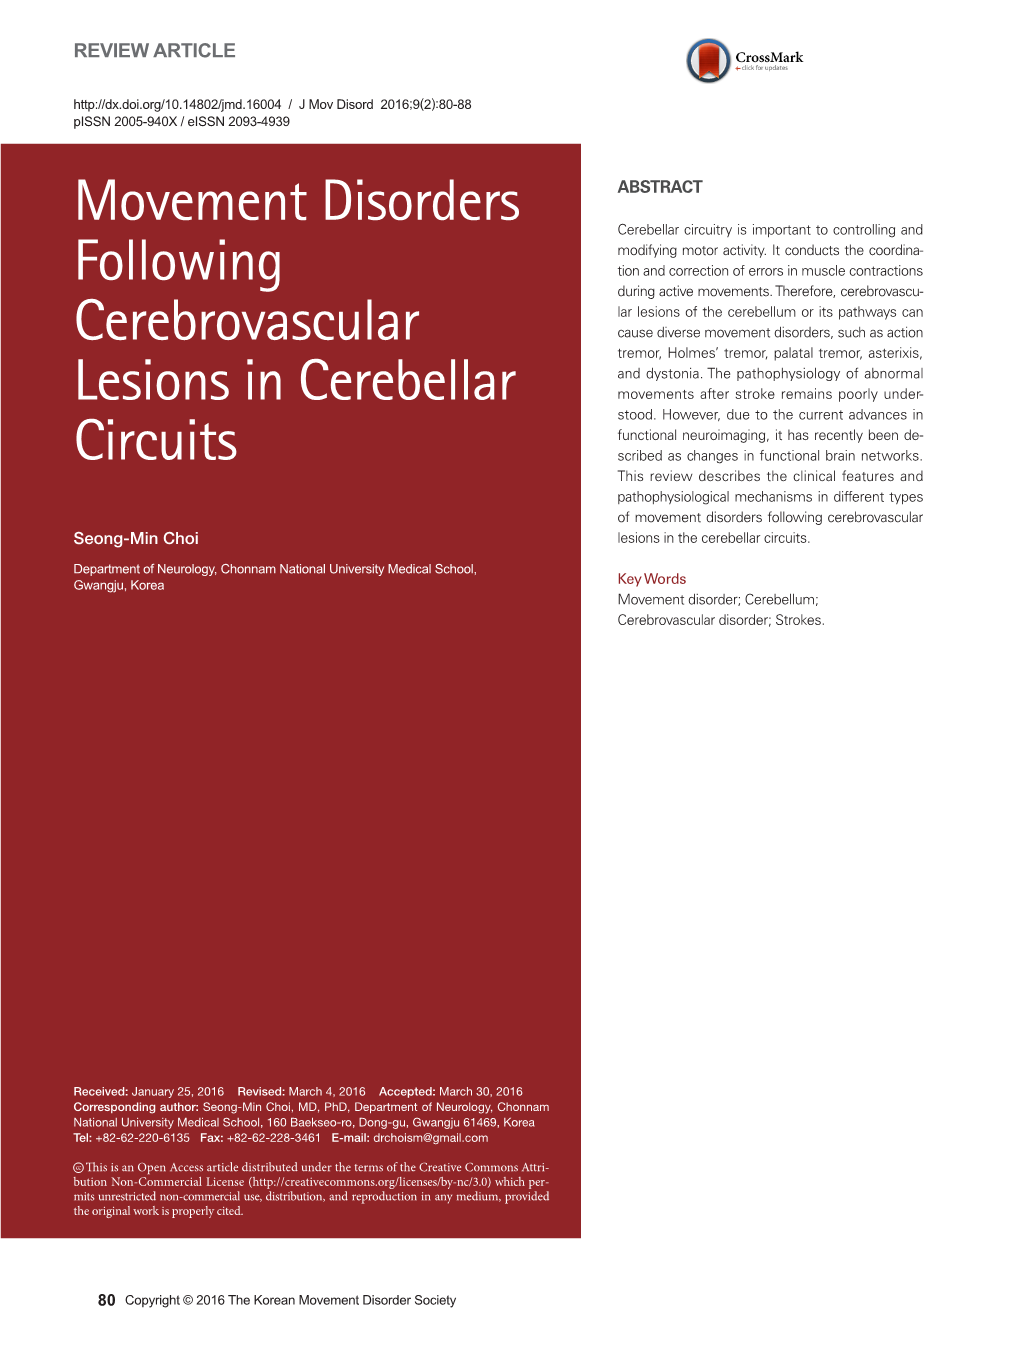 Movement Disorders Following Cerebrovascular Lesions In